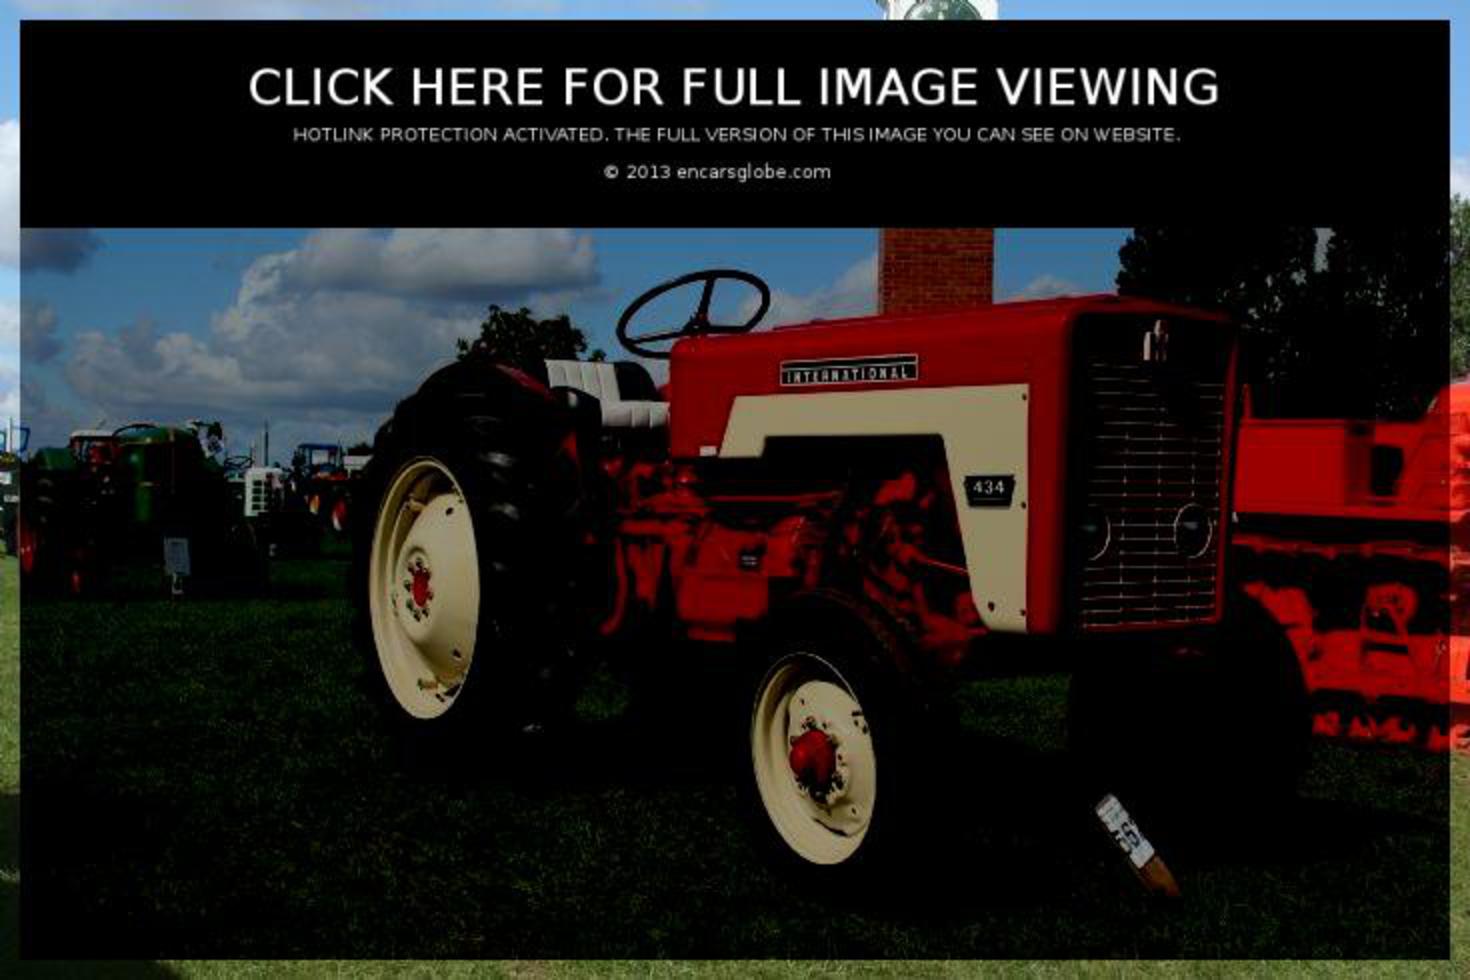 International Harvester 434 Photo Gallery: Photo #10 out of 12 ...